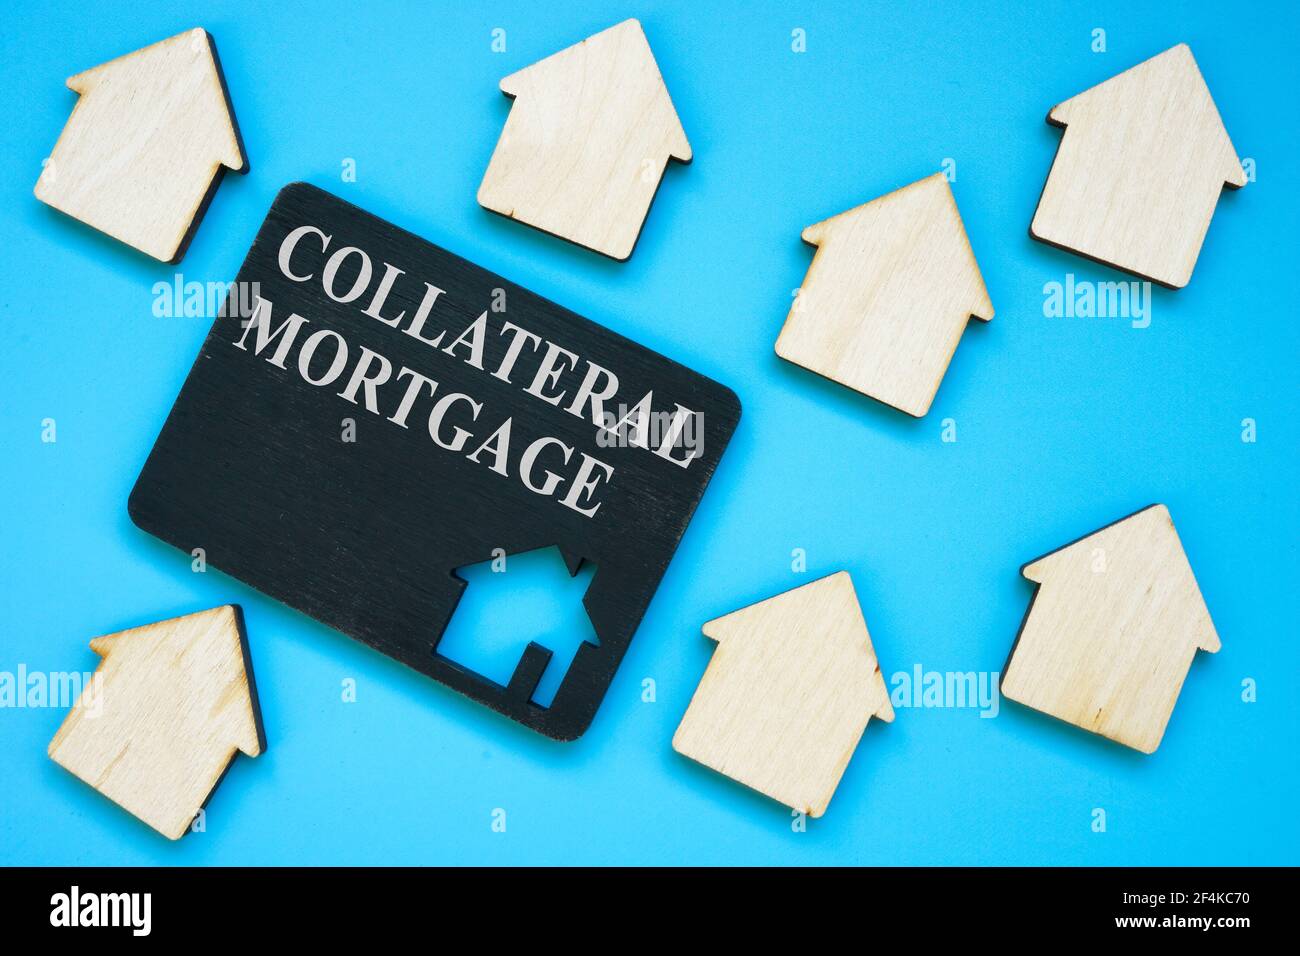 Collateral Mortgage sign on the plate and small houses. Stock Photo